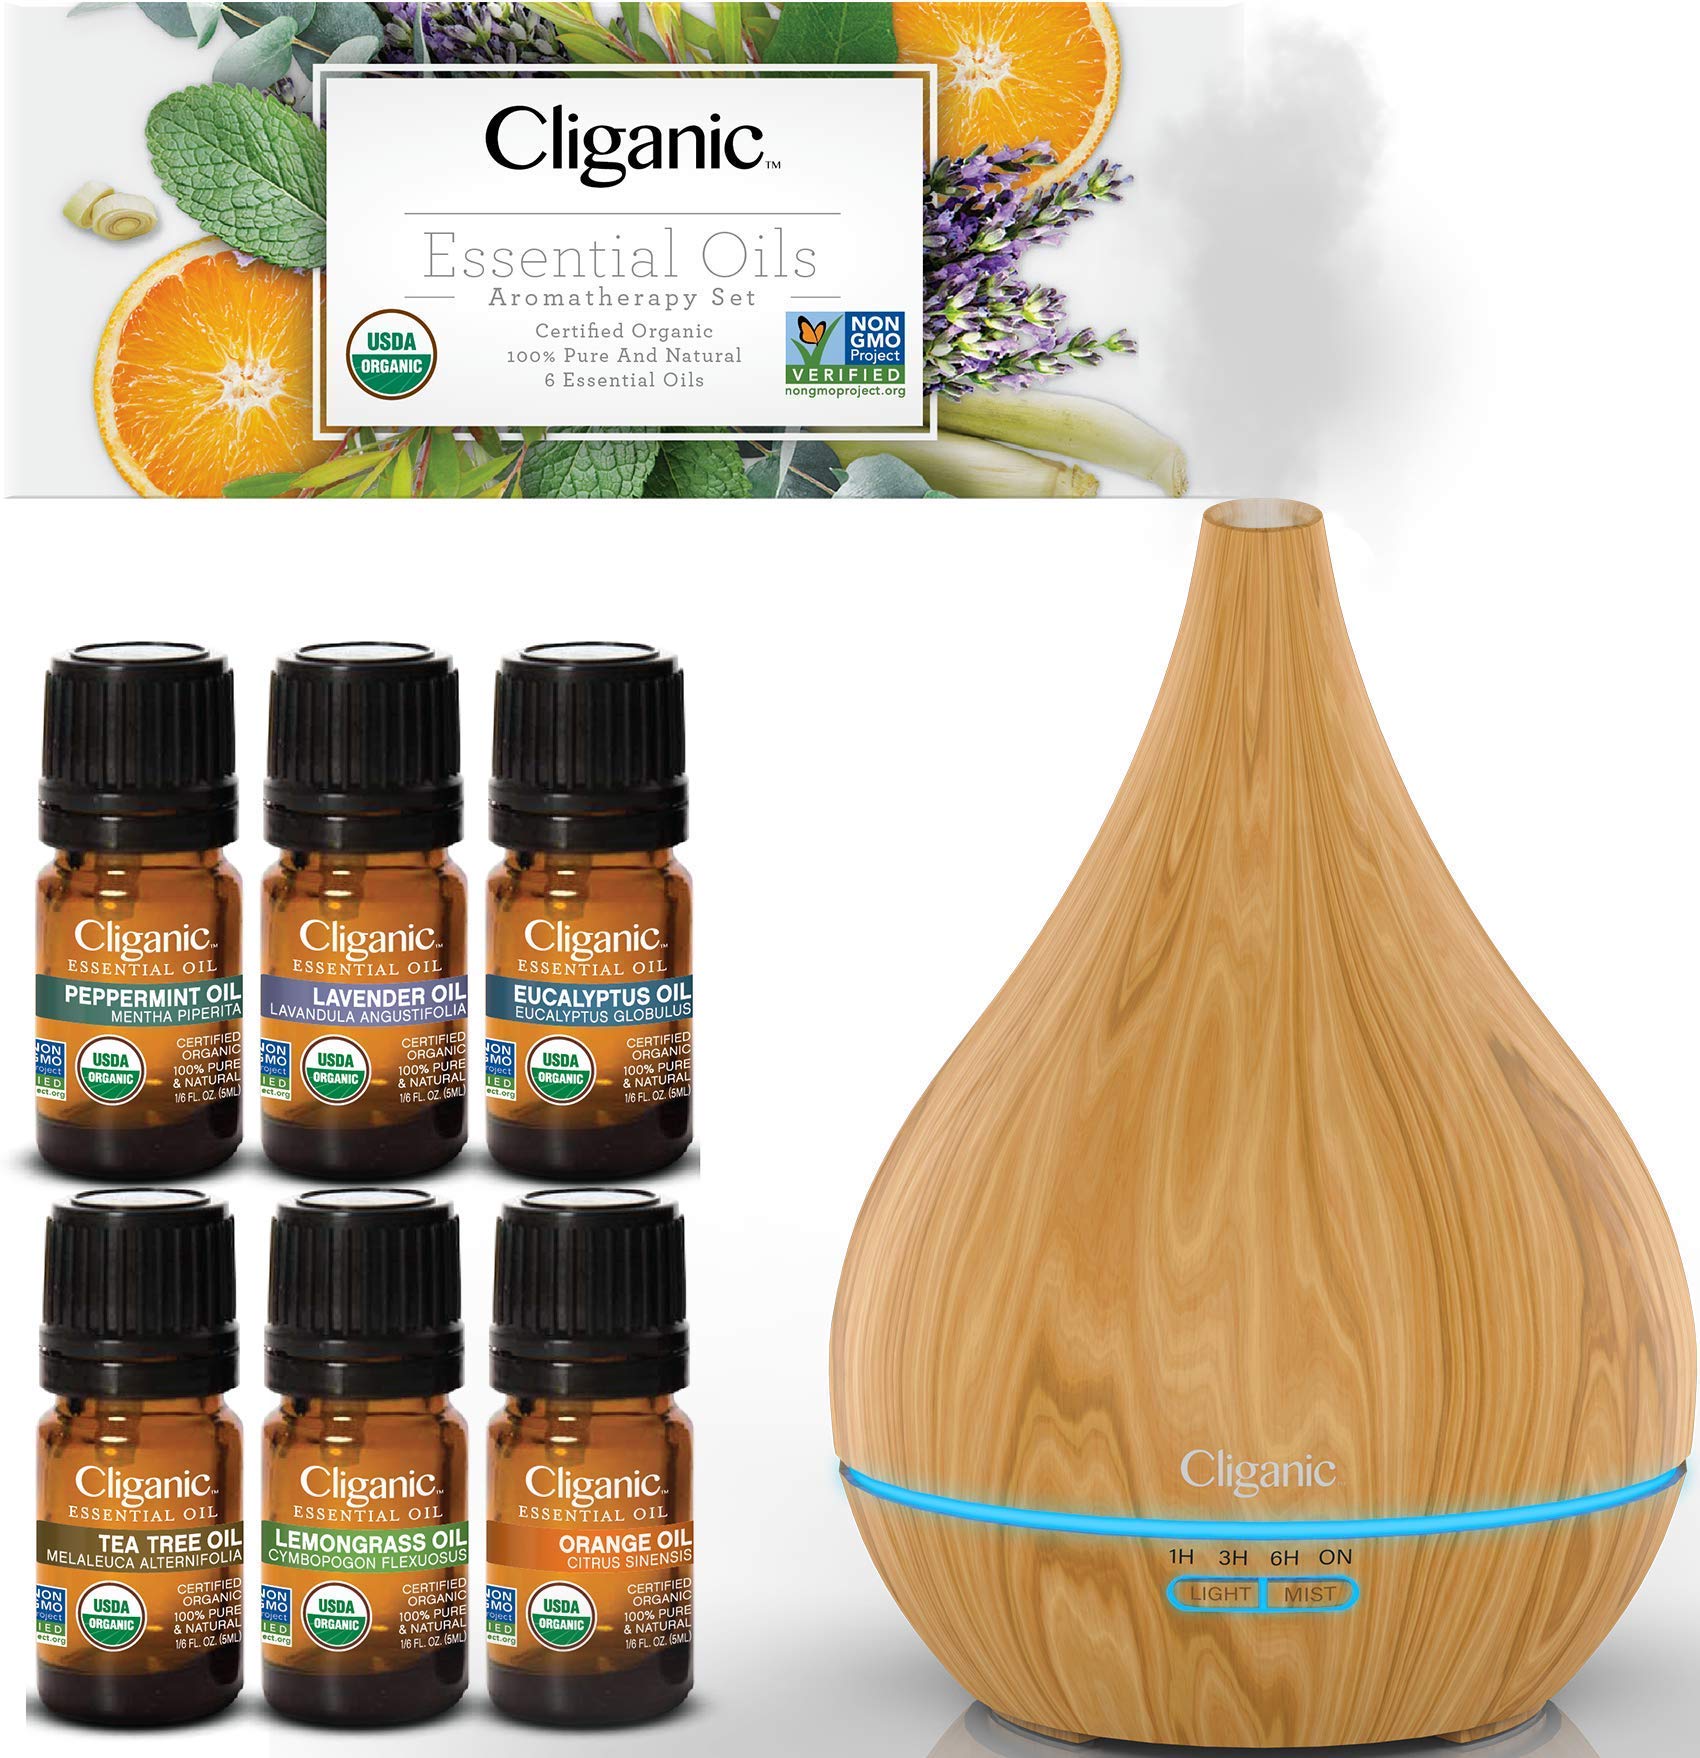 Cliganic Organic Aromatherapy Set (Top 6) with Diffuser